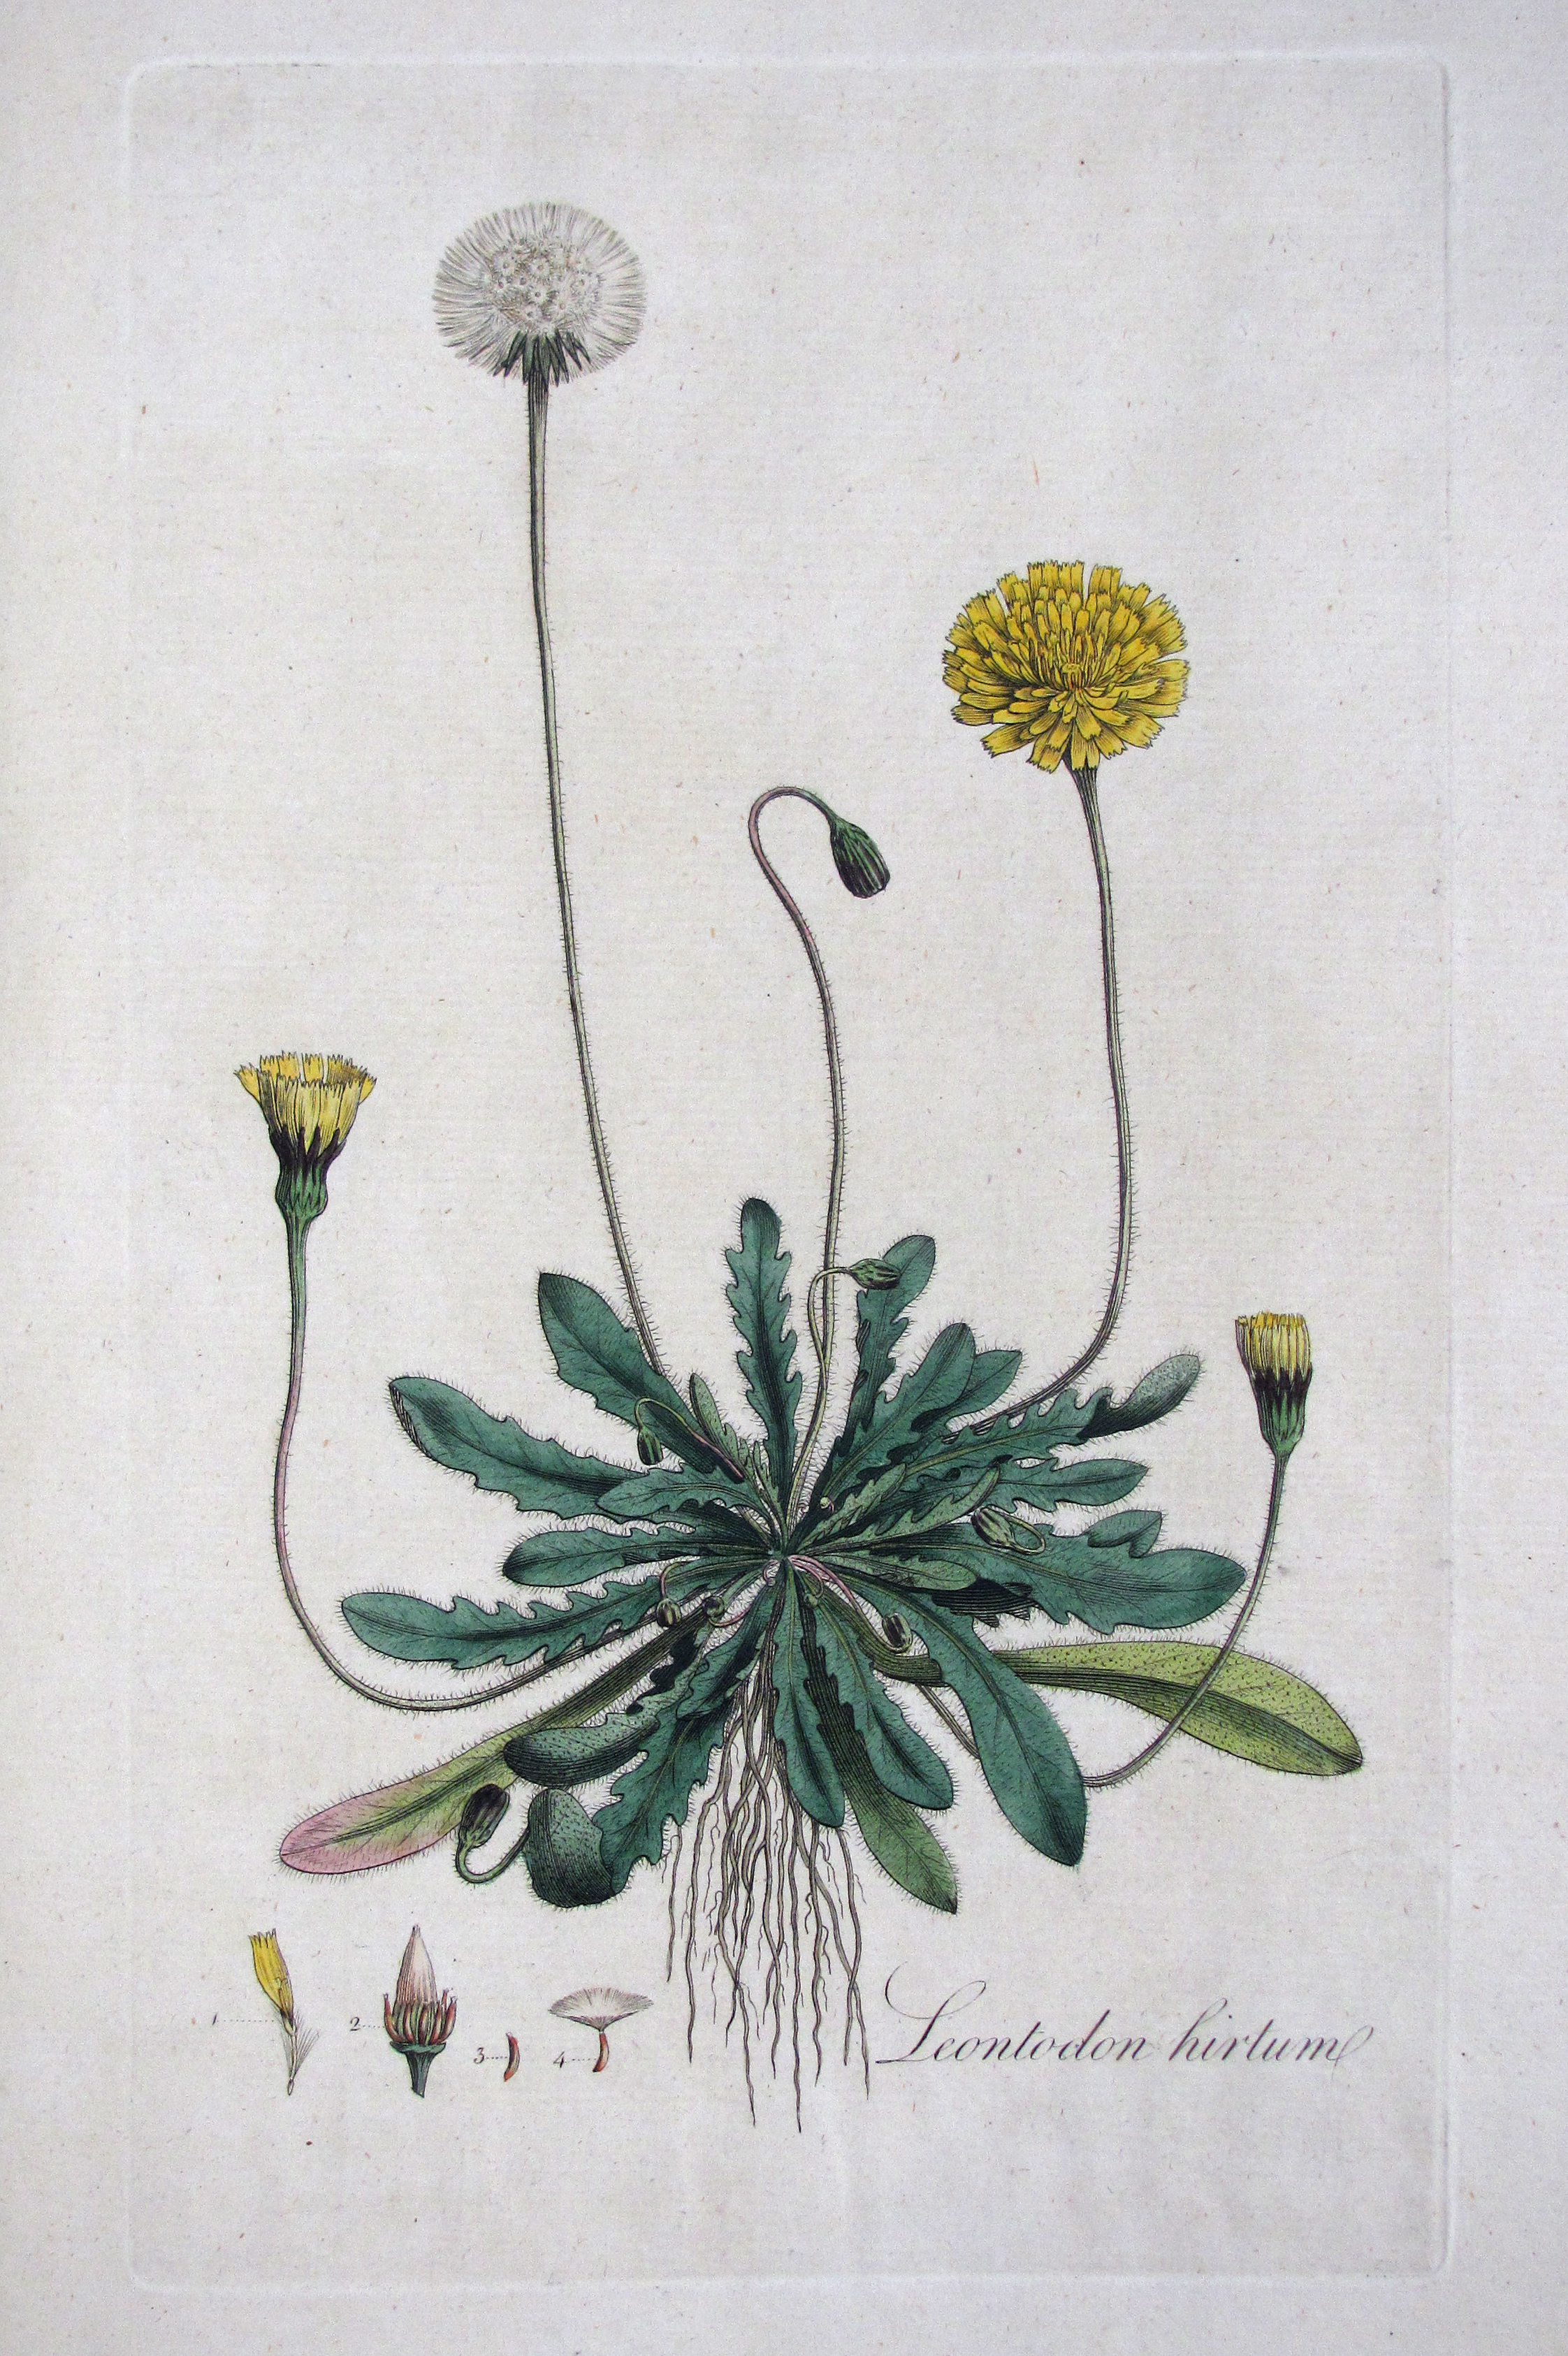 Curtis, William, Flora Londinensis: or, plates and descriptions of such plants as grow wild in the environs of London, with  their places of growth, and times of flowering, their  several names according to Linnaeus and other authors: with a particular description of each plant in latin and english. To which are added their several uses in medicine, agriculture, rural oeconomy and other arts.